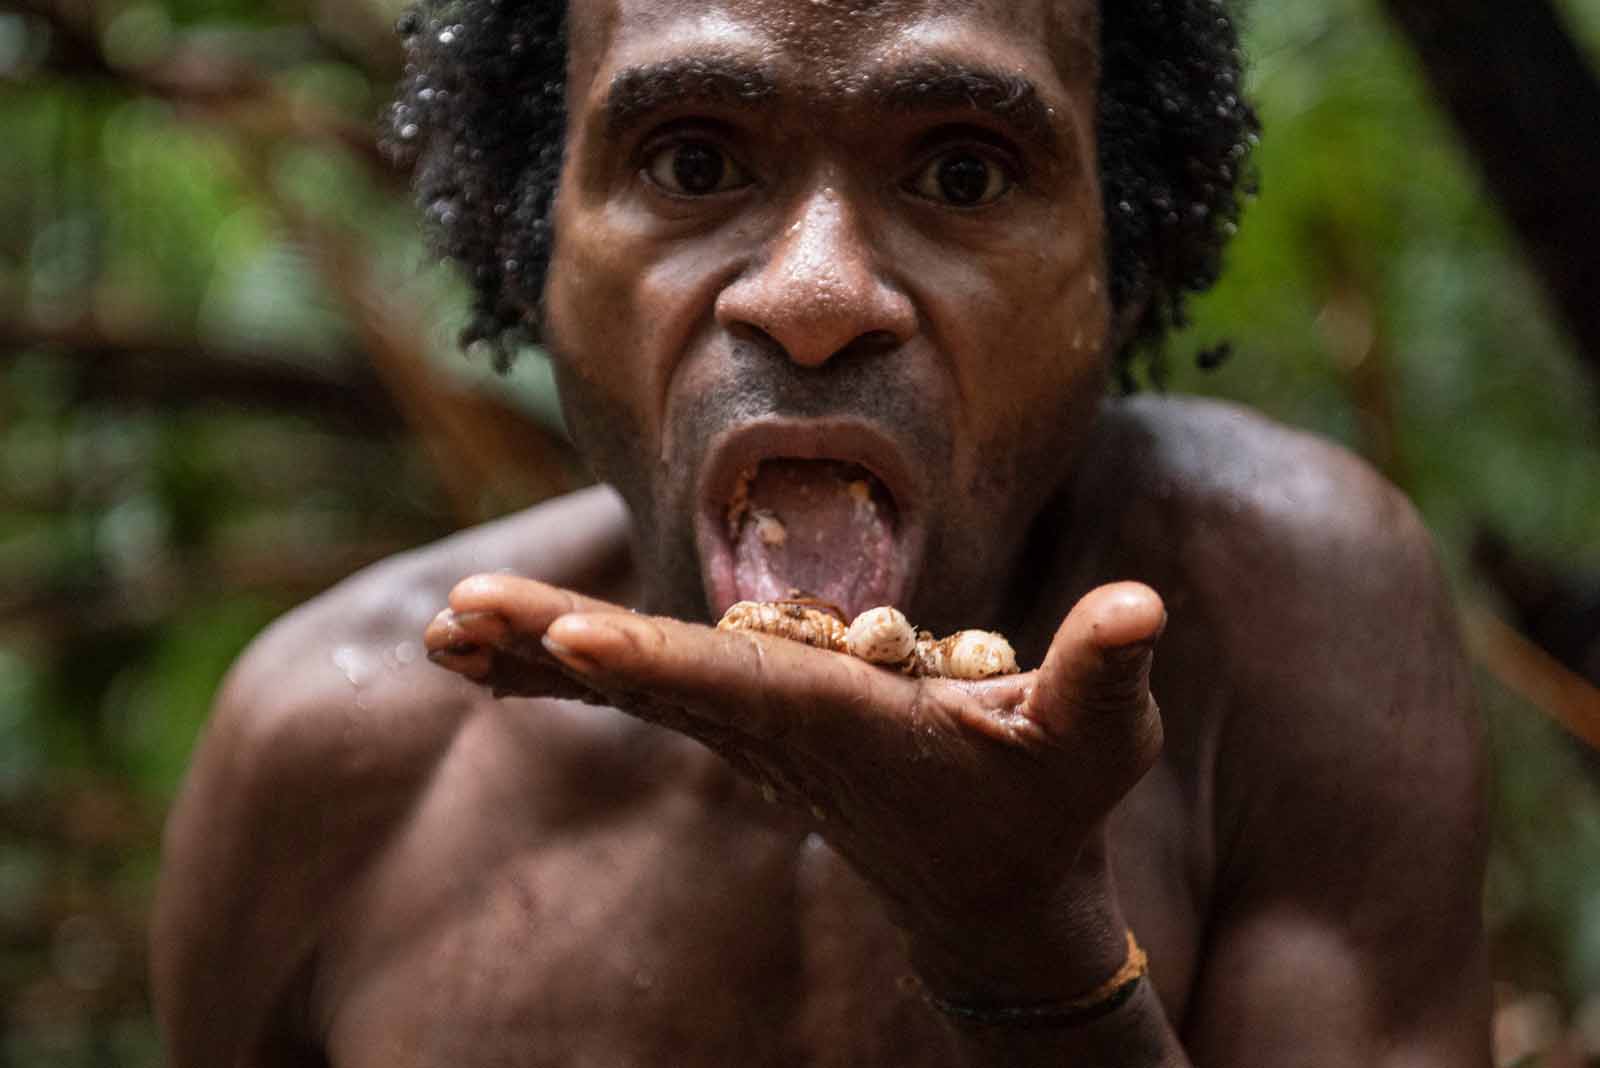 It may seem like this is ancient history, but cannibal tribes are still roaming the planet as we speak. The Korowai are still practicing cannibalism today.